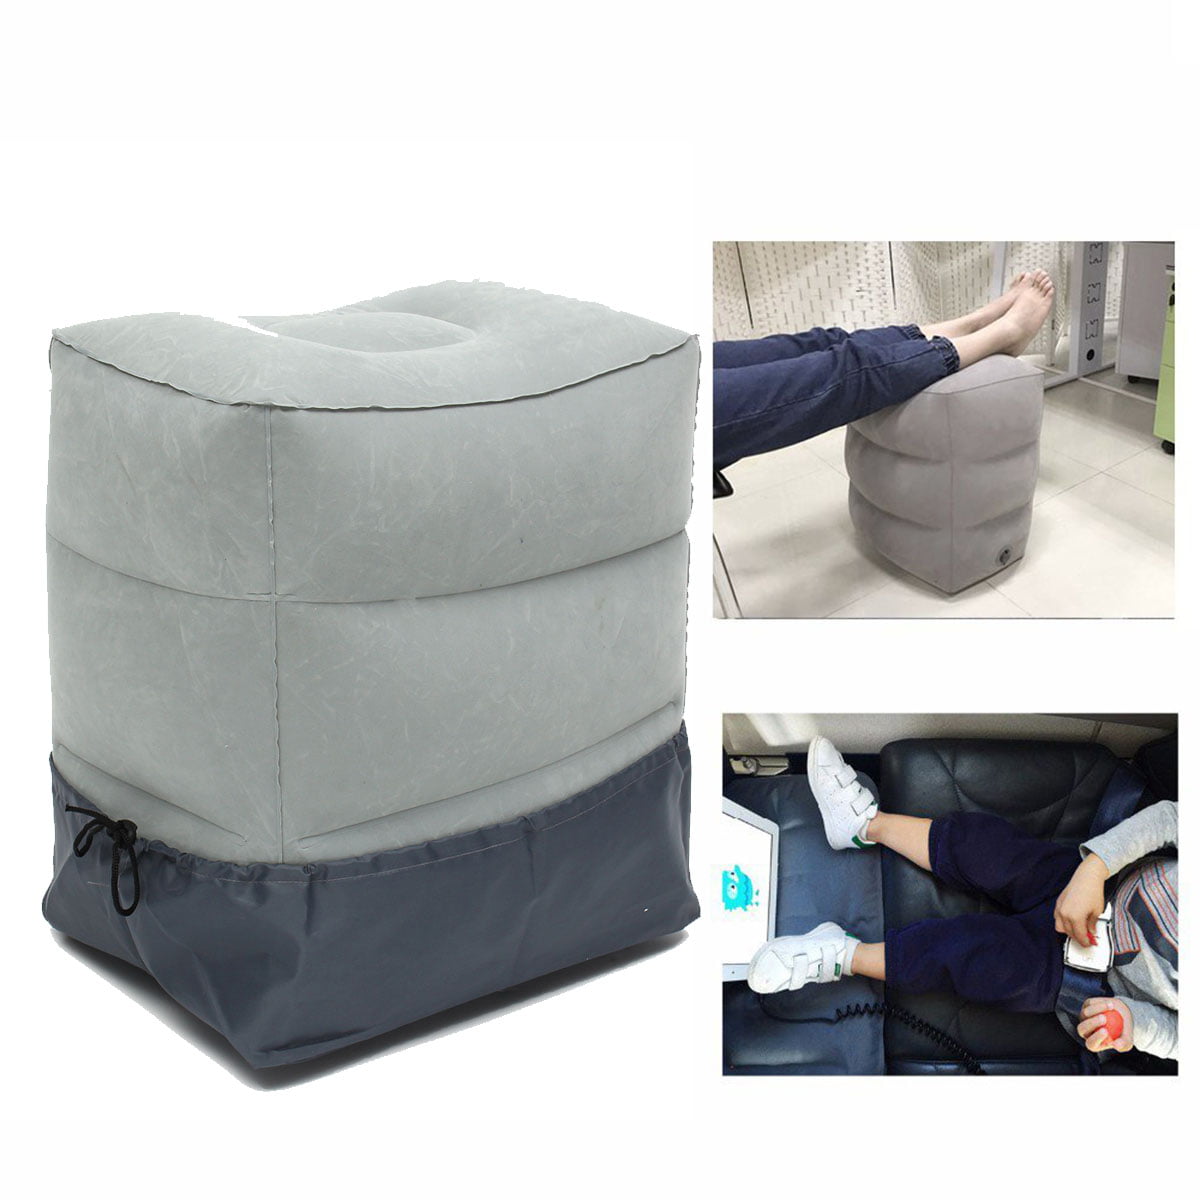 Dark Blue -1Pack Inflatable Travel Pillow Leg Rest,Kids Airplane Pillow Bed-3 Layer Adjustable Height Travel Foot Rest Cushion for Airplanes Airplane Footrest Cars Home & Office Trains 